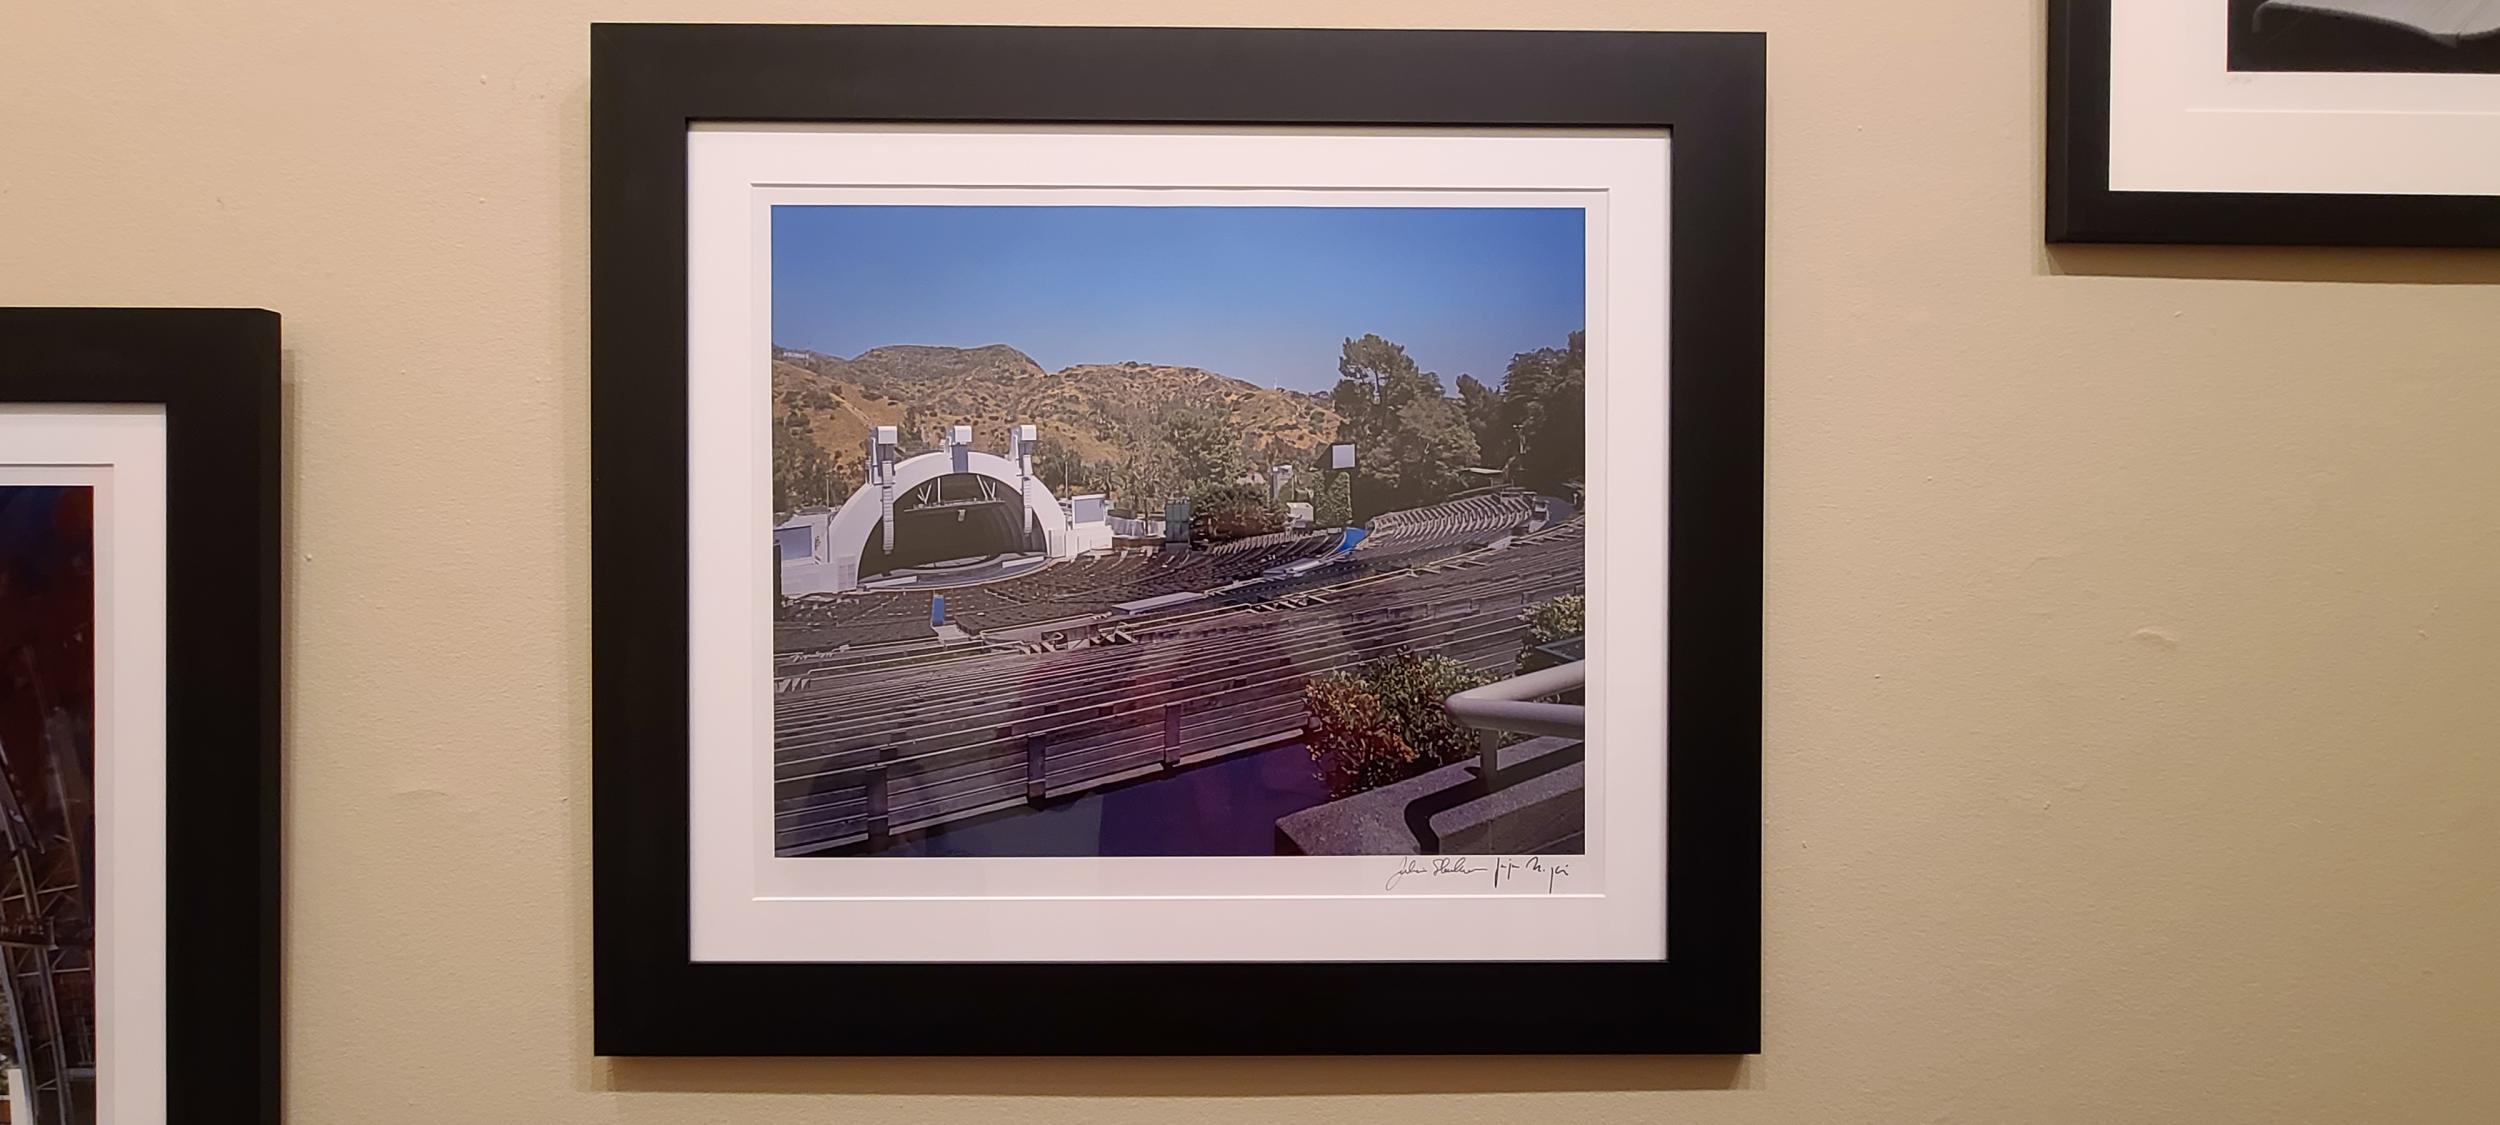 Original untitled color chromogenic photographic print of the Hollywood Bowl under renovations by photographer Julius Shulman, signed. Framed in a black wood frame.

This was a small limited edition and photographed for a fundraiser for the